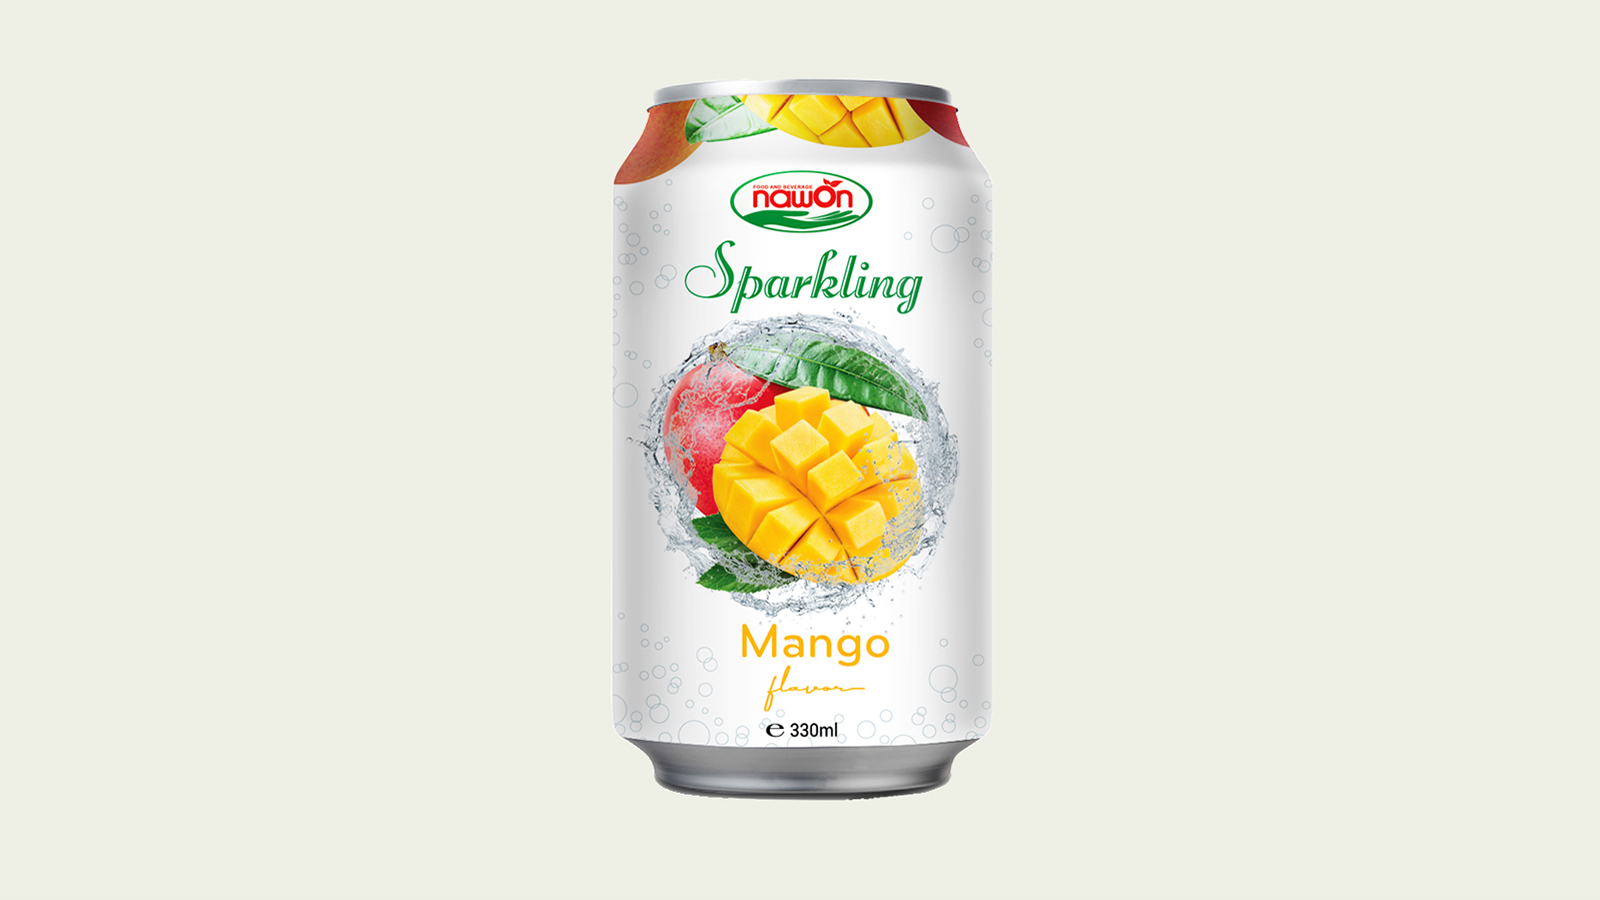 Wholesale sparkling water: a complete guide